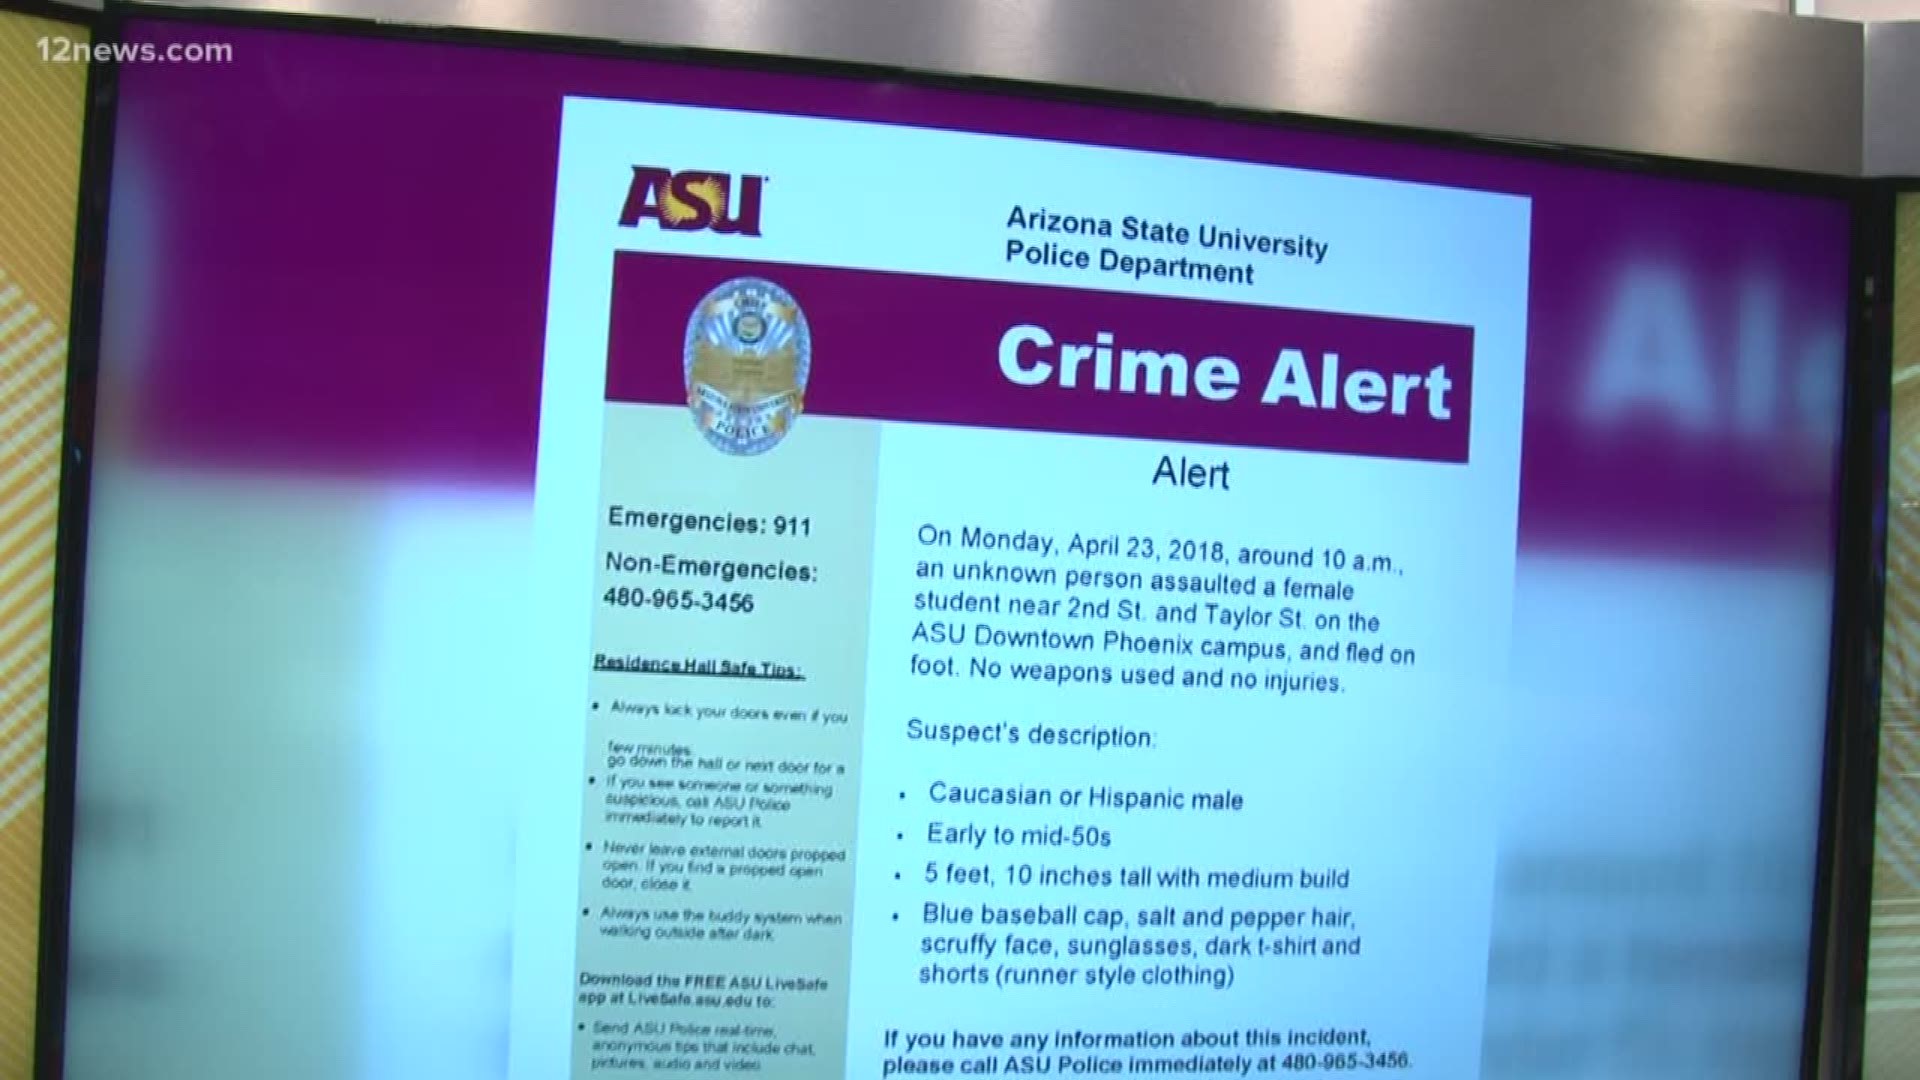 Arizona State University police are asking for the public's help in tracking down a suspect they say assaulted a female student on the university's downtown campus Monday morning.